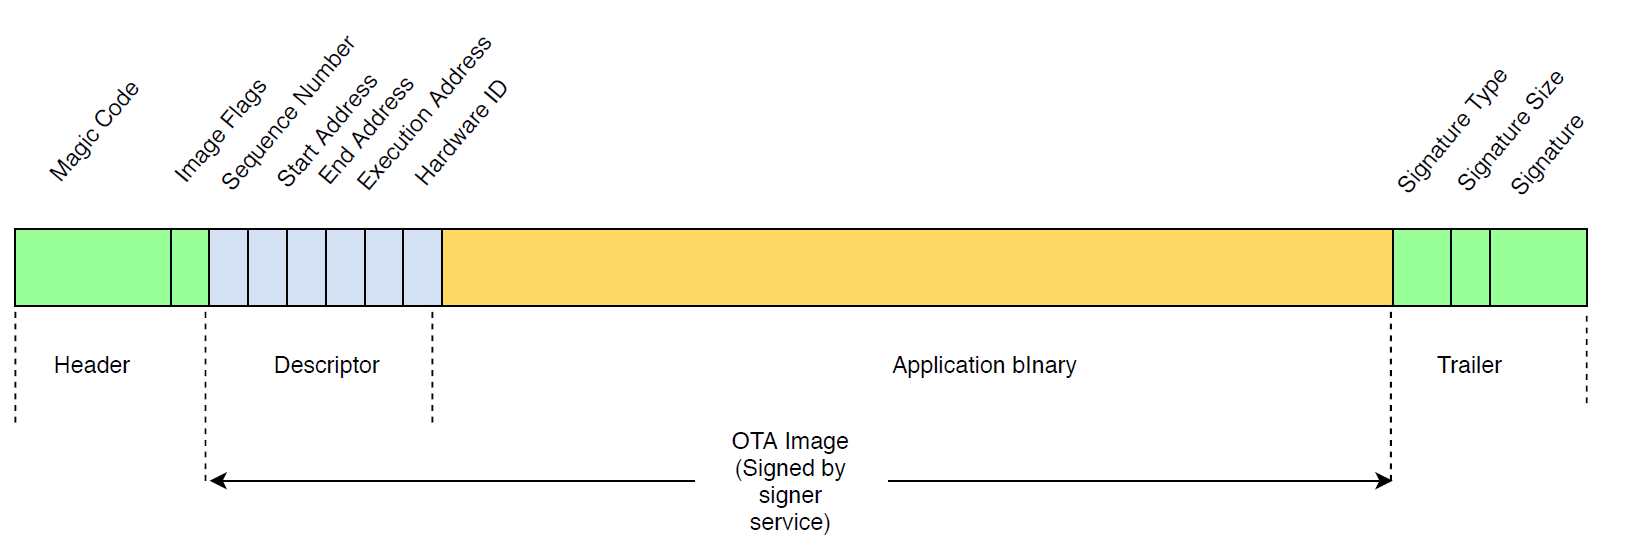 OTA Image structure showing header, descriptor, application binary (signed by signer service), and trailer sections with fields like magic code, sequence numbers, start and end addresses, execution address, hardware ID.